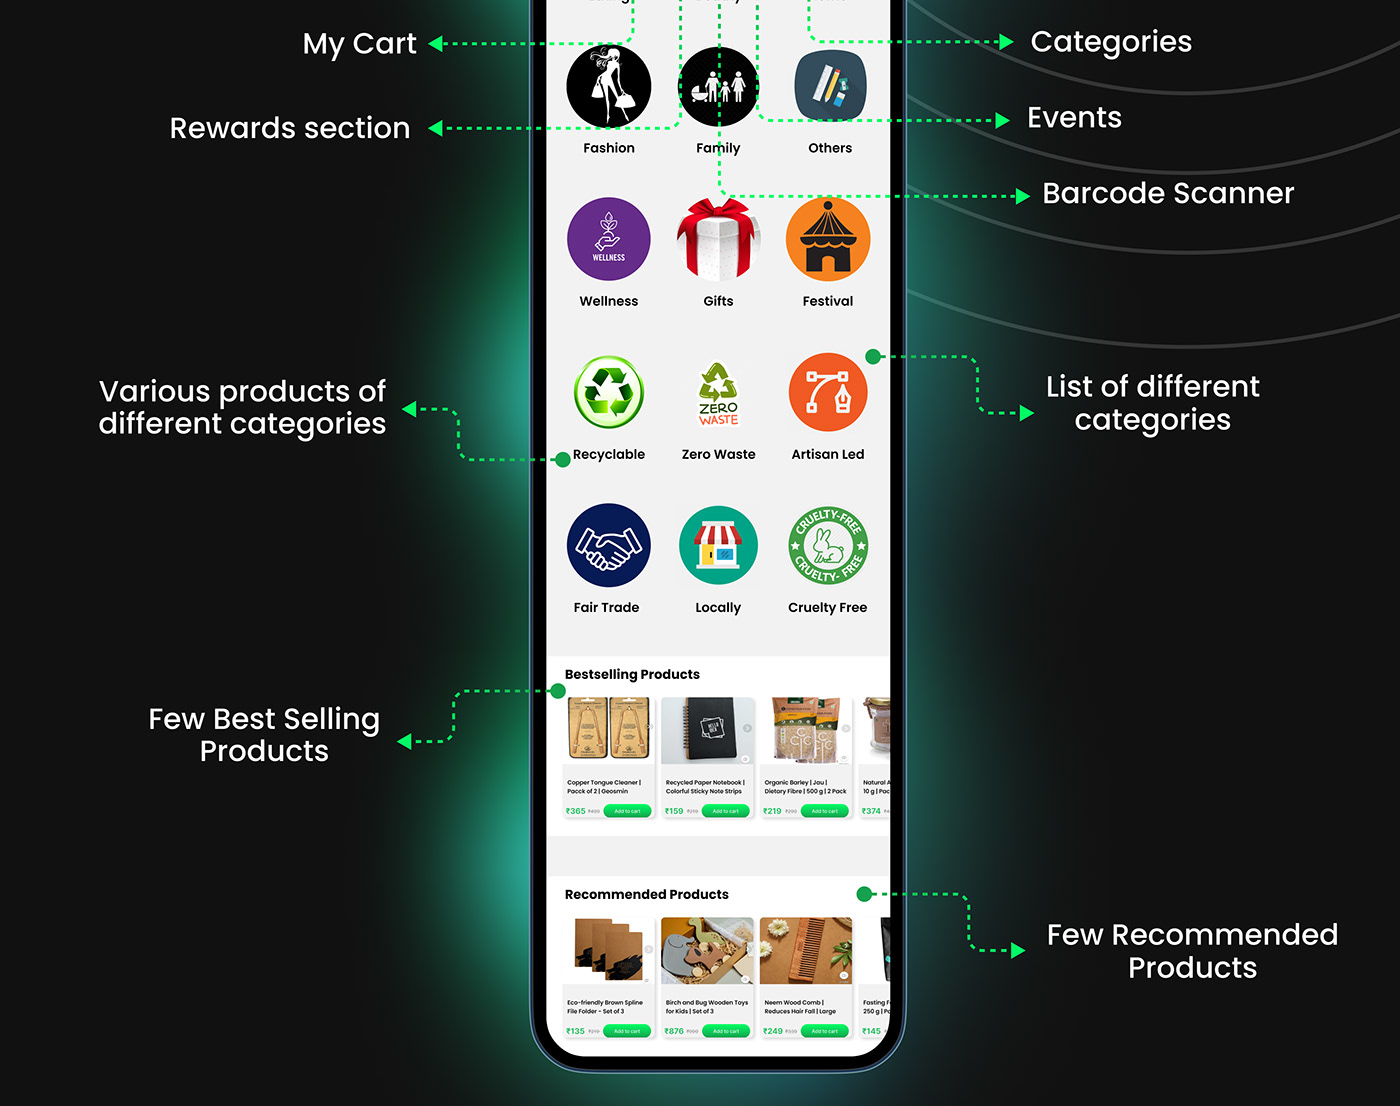 UI UX Case study ui ux app design user interface design user experience Mobile app ecofriendly shopping app green cart green cart case study sustainable shopping app